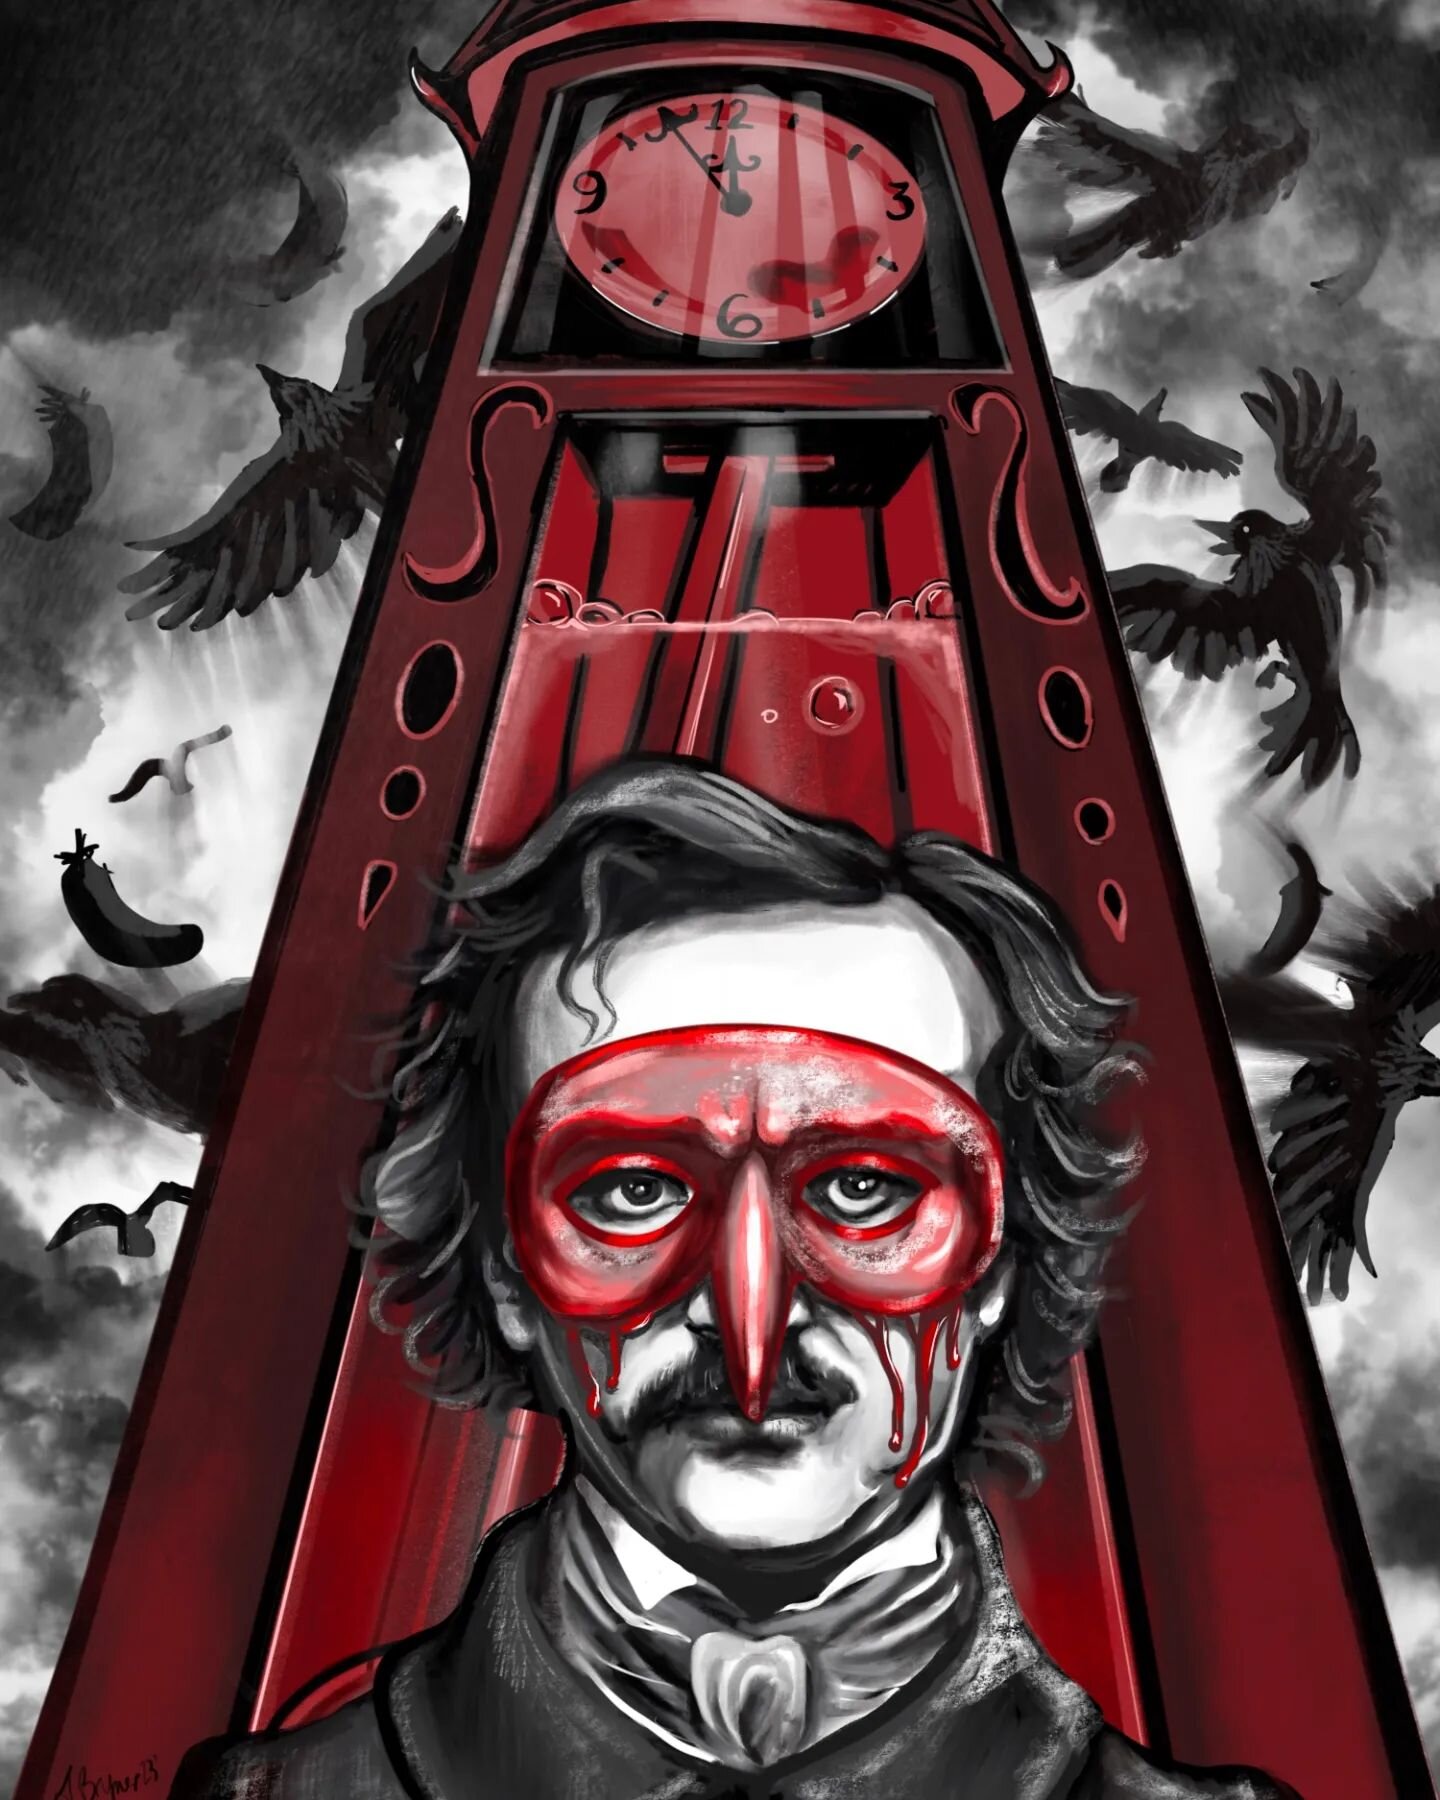 Forgot to share my latest piece because I was soOOoo crazy prepping for Poe Fest! Met so many cool people and I hope I'm able to return next year. The festival organizers were SO nice and helpful, and had our backs whenever issues arose. 

So, enjoy 